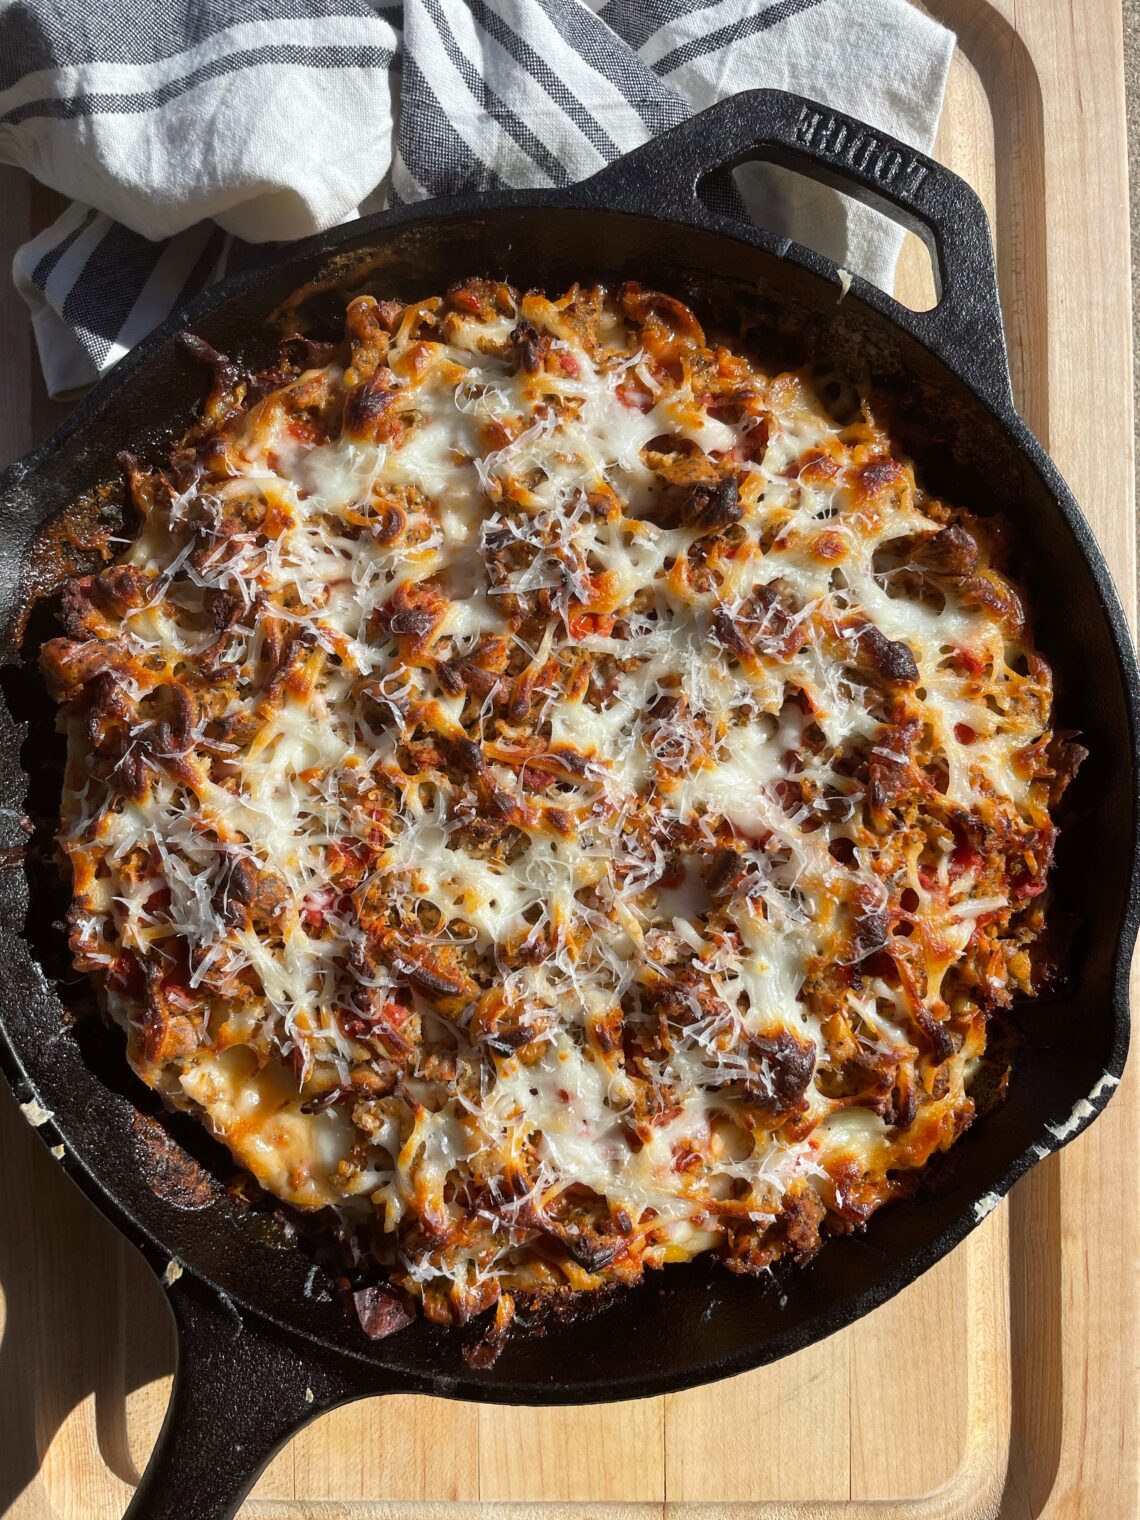 Chicken Parm Cast Iron Skillet Pizza from Seemore Meats